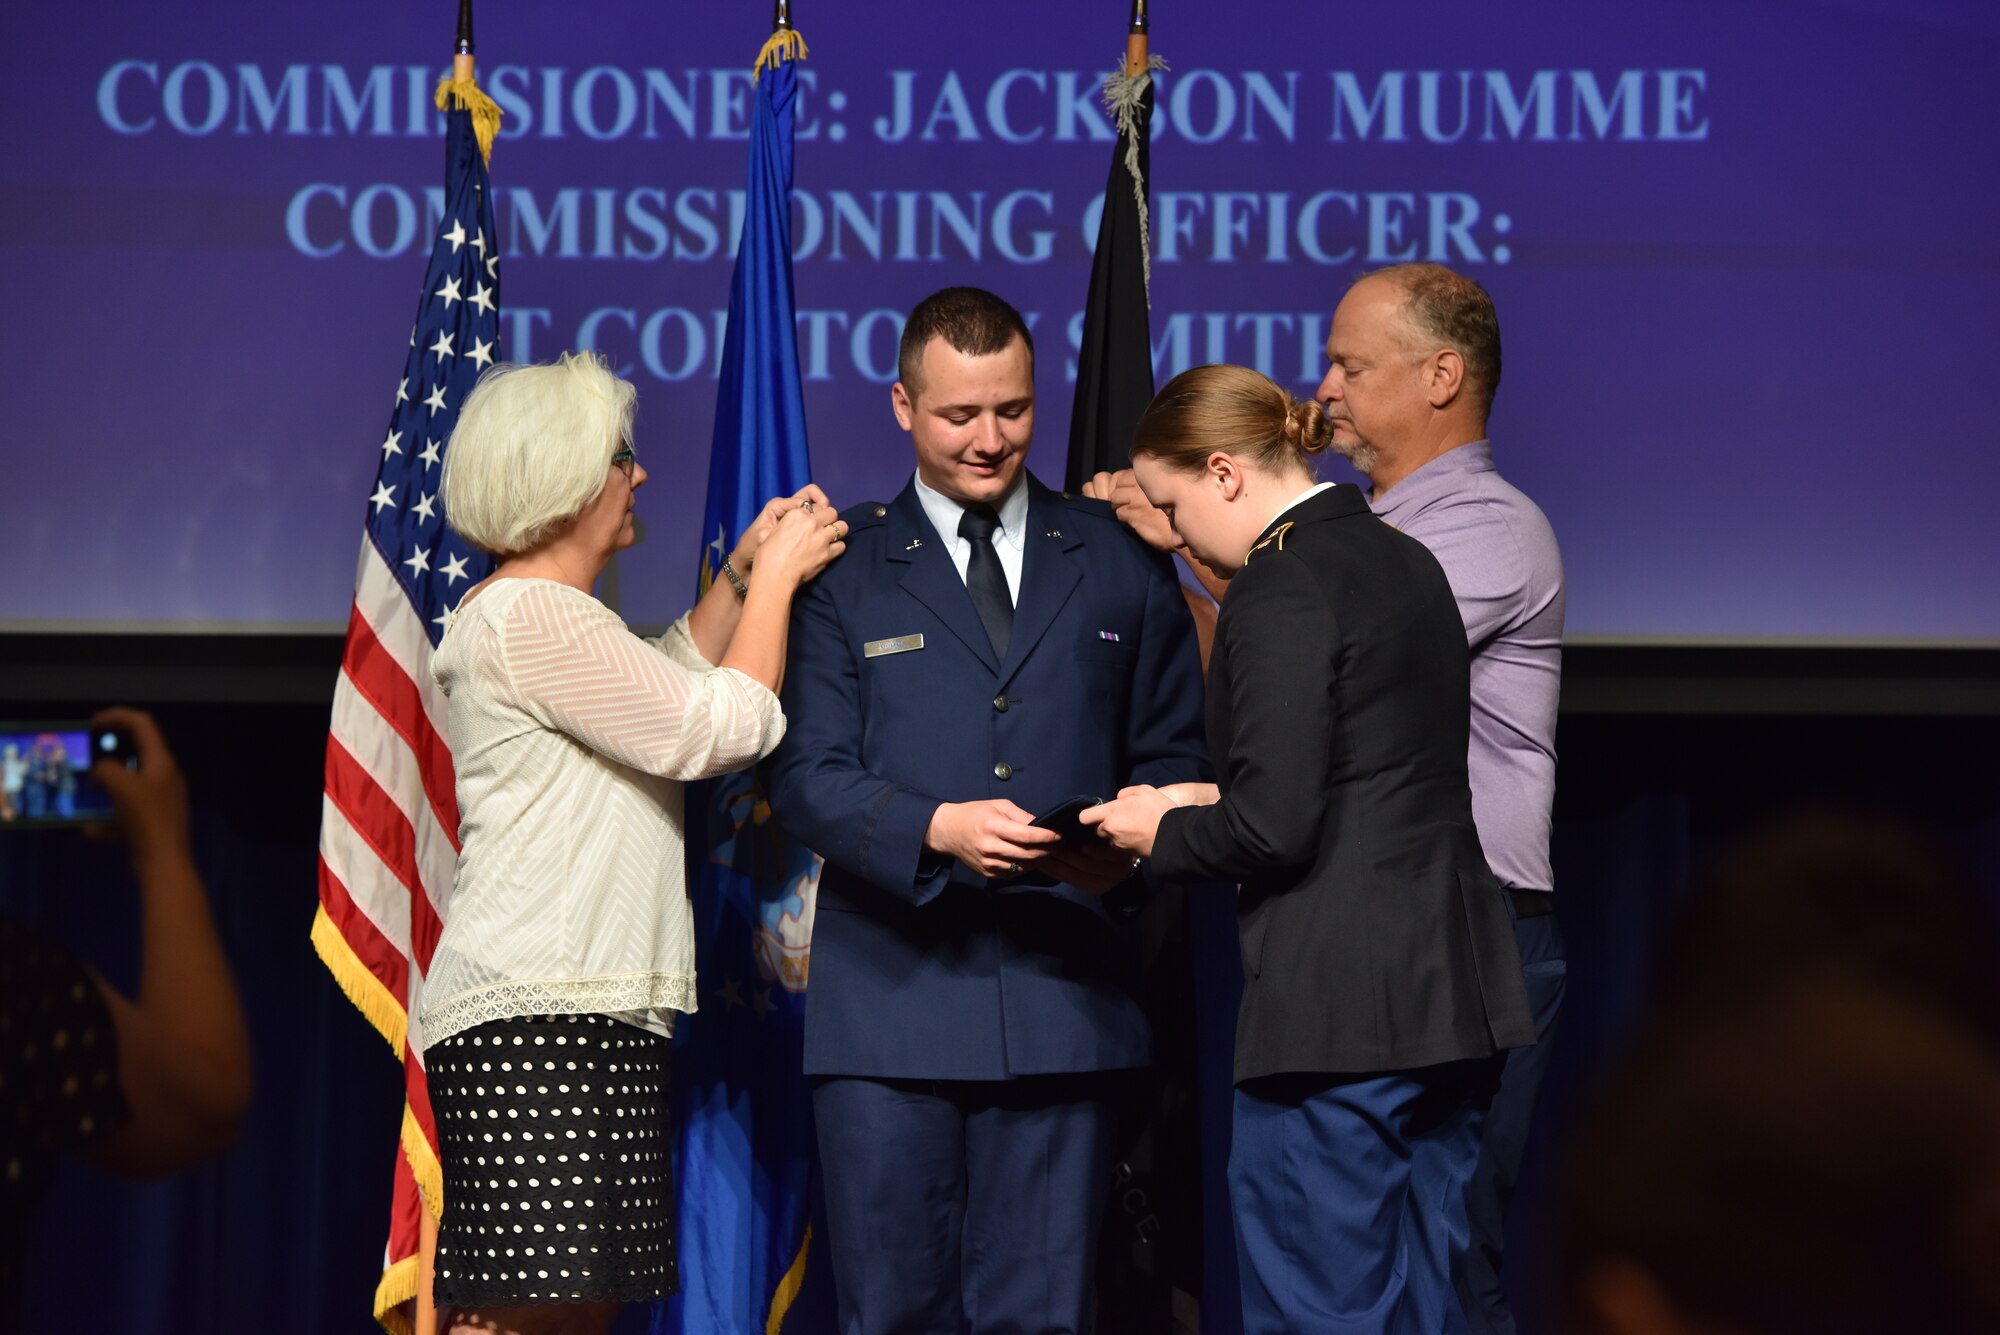 U.S. Air Force 2nd Lt. Jackson Mumme, Angelo State University graduate, gets his rank pinned on at Angelo State University, San Angelo, Texas, May 12, 2023. The new officers were joined by friends and family to celebrate their commissioning. (U.S. Air Force photo by Airman 1st Class Madison Collier)